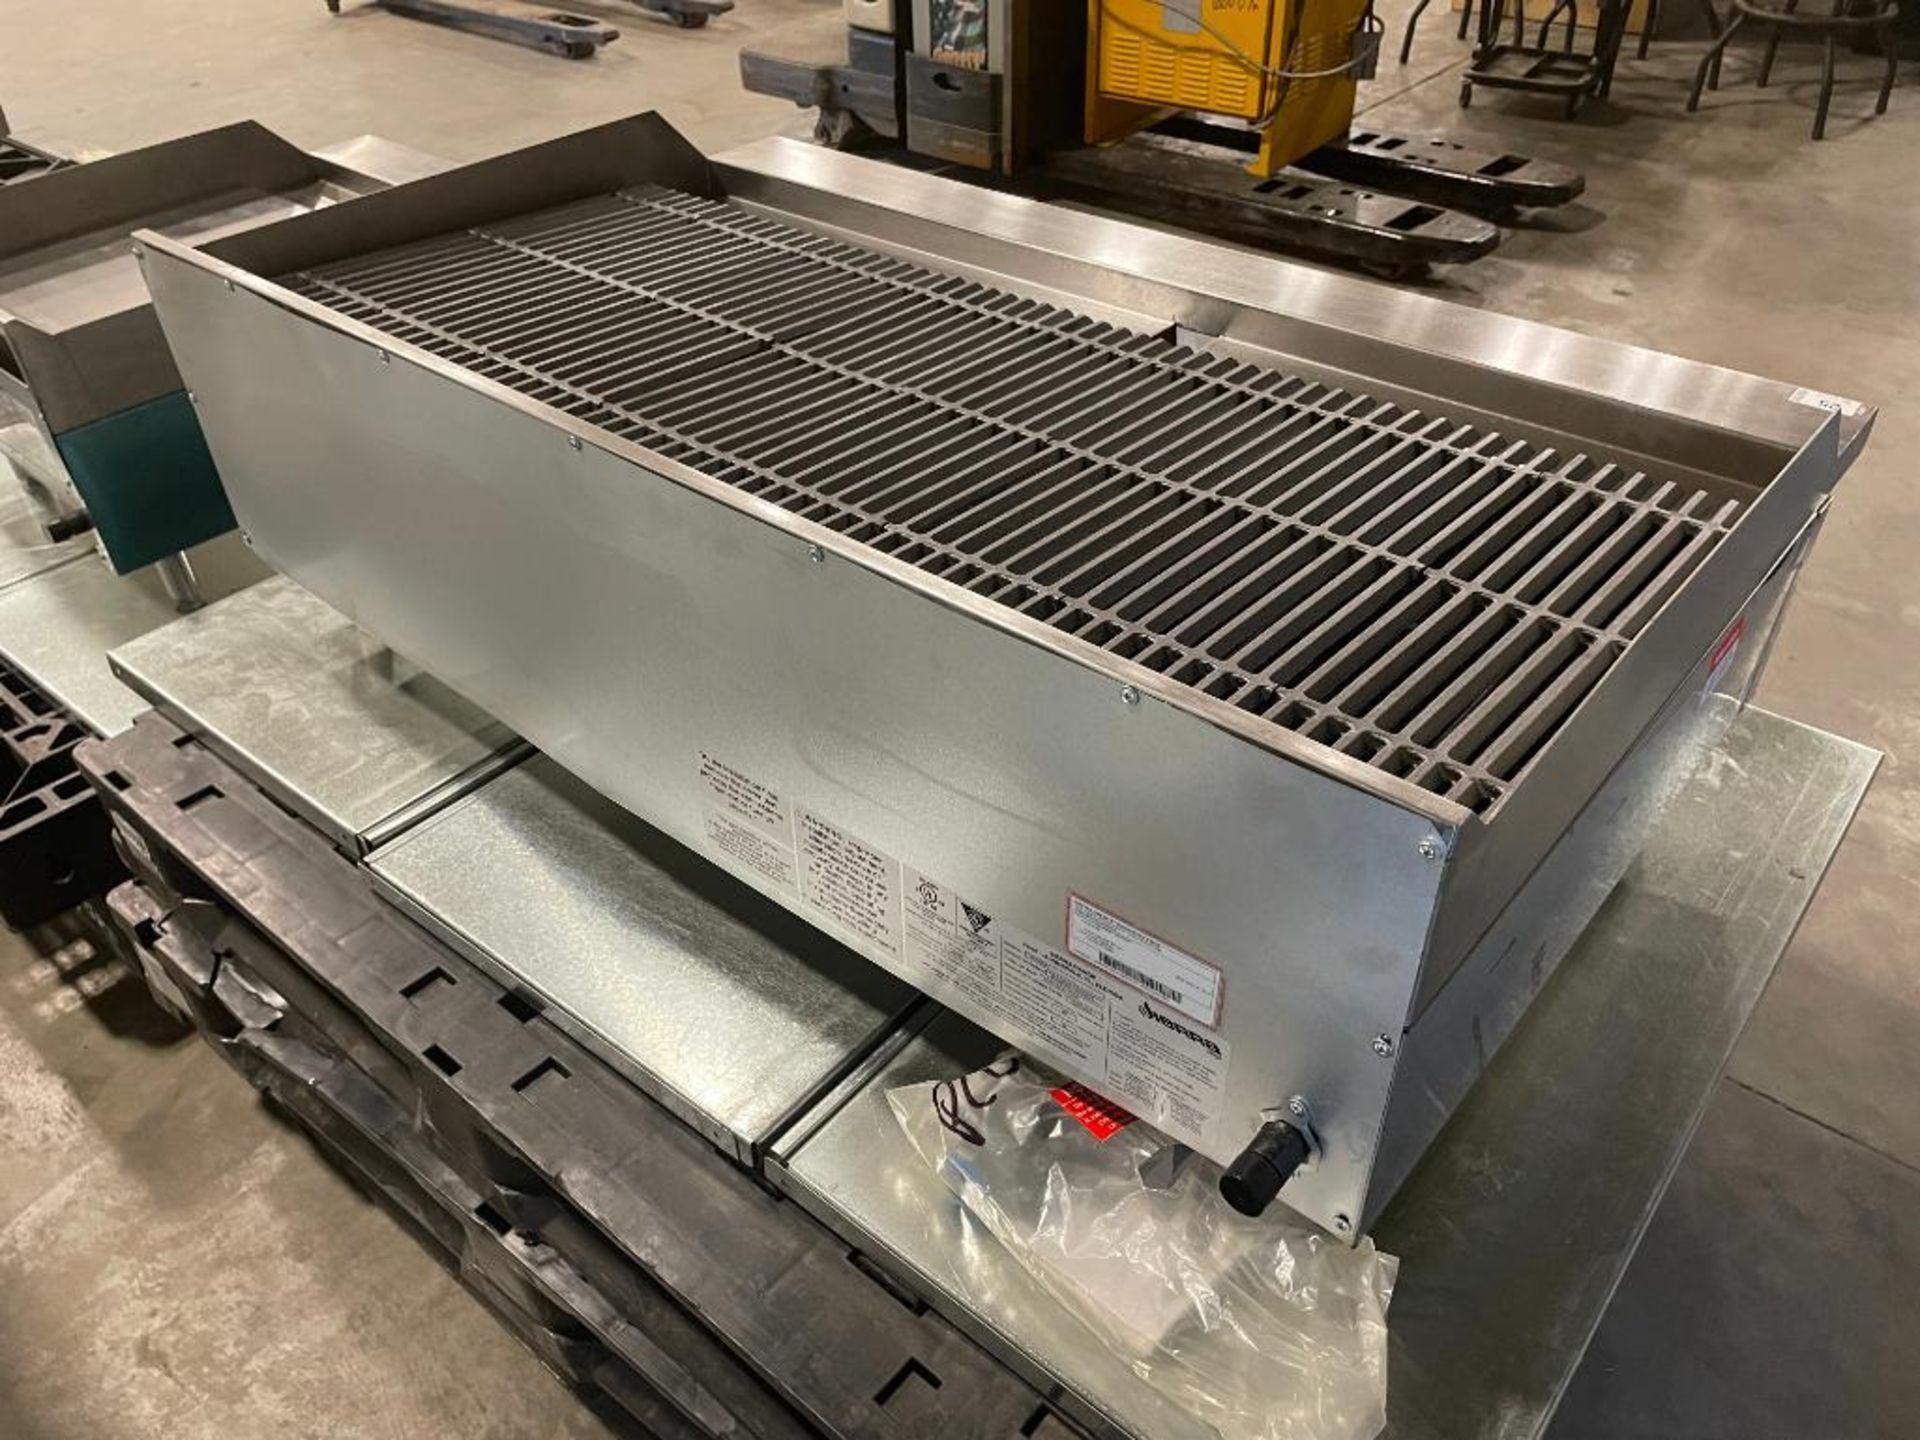 NEW SIERRA SRRB48 - 48" GAS RADIANT CHARBROILER - Image 6 of 7